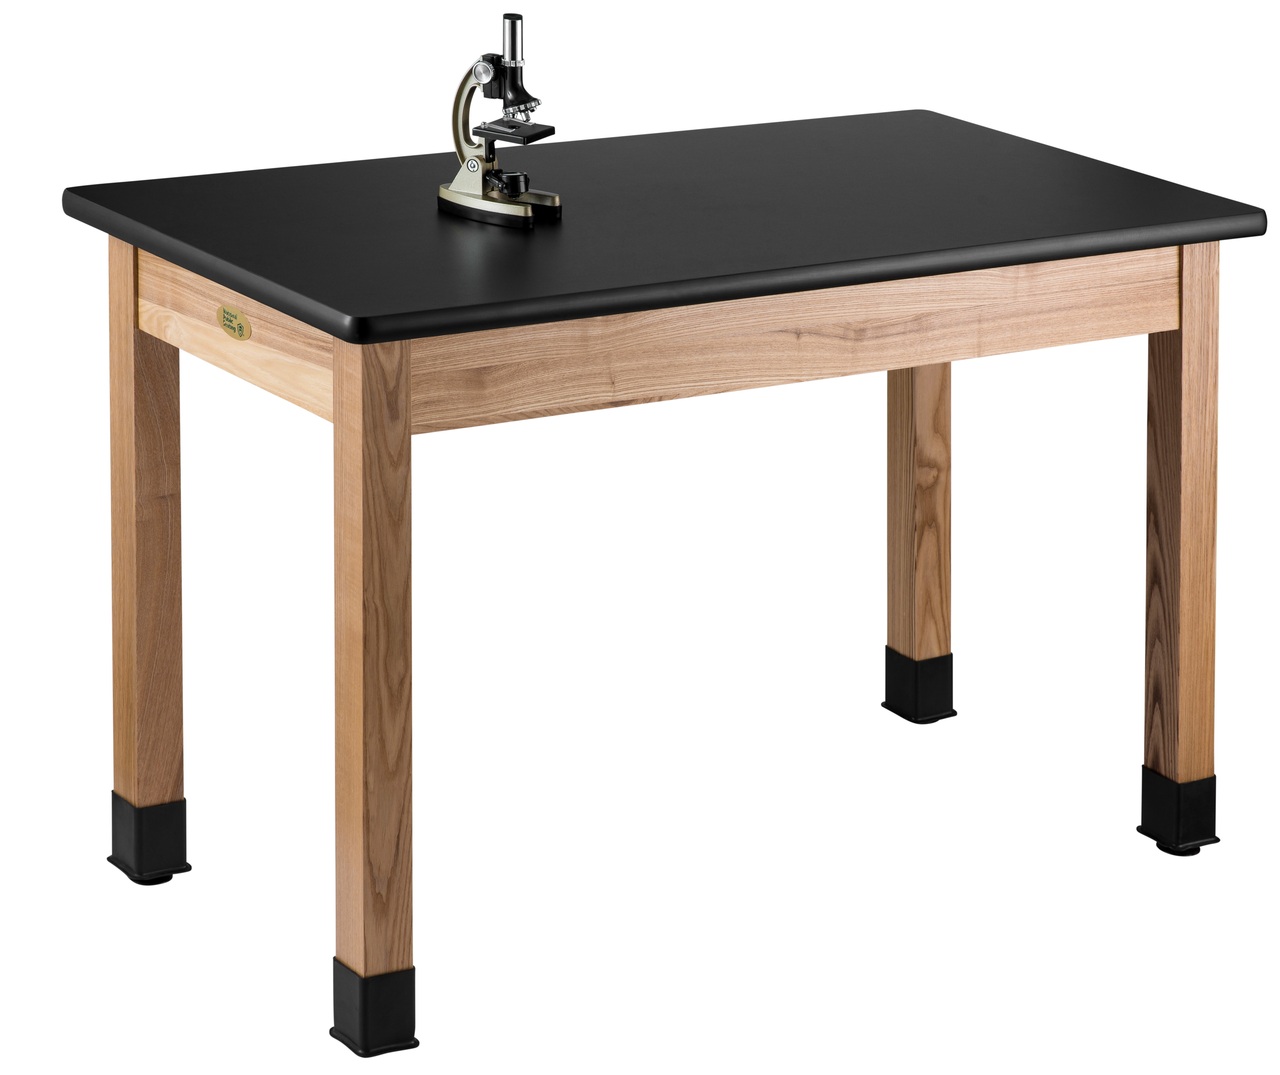 NPS Wood Science Lab Table -  24"x72"x36" -  HPL Top - Black Top and Ash Leg